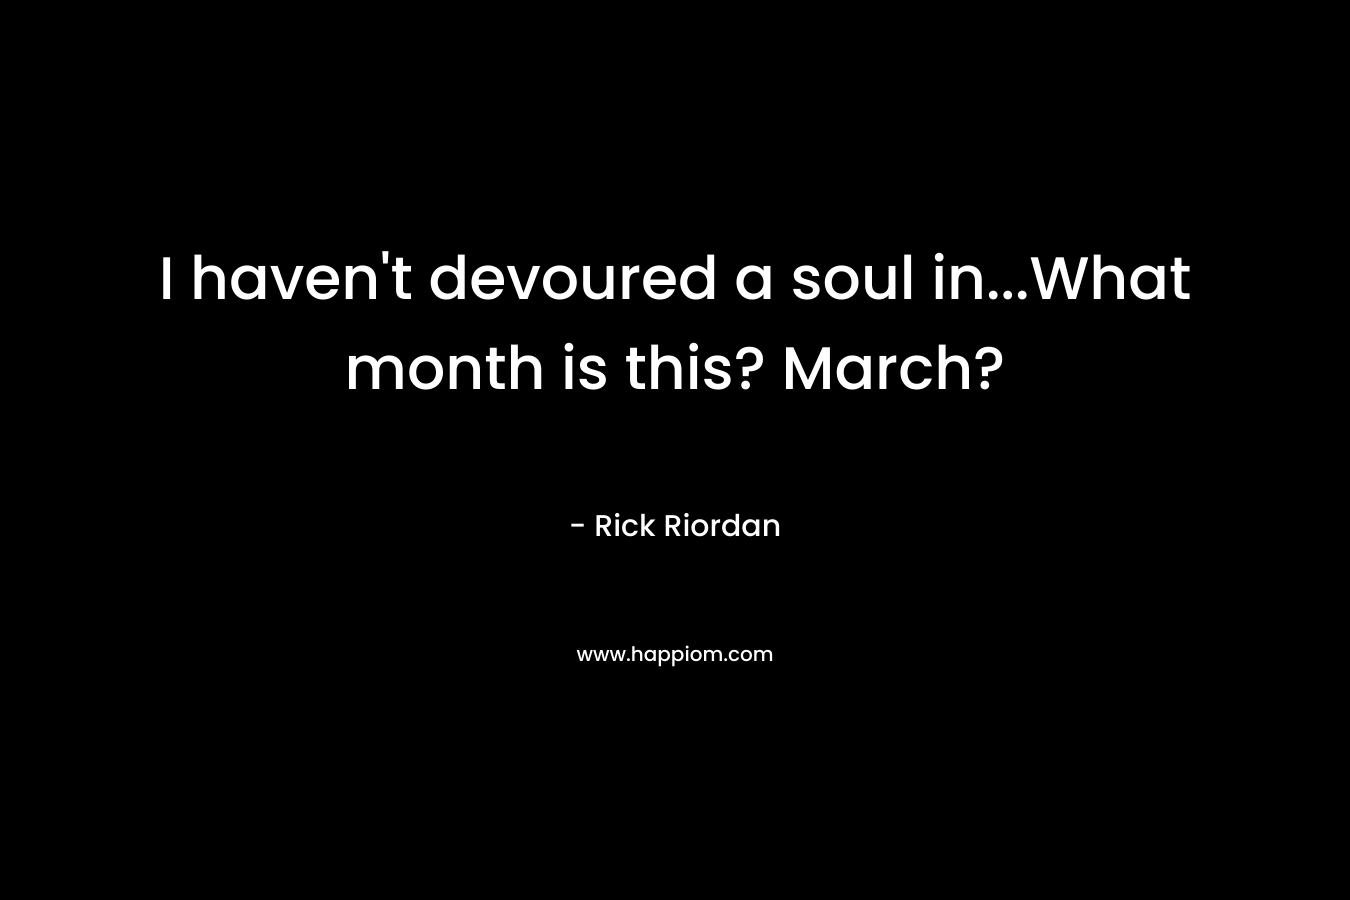 I haven't devoured a soul in...What month is this? March?